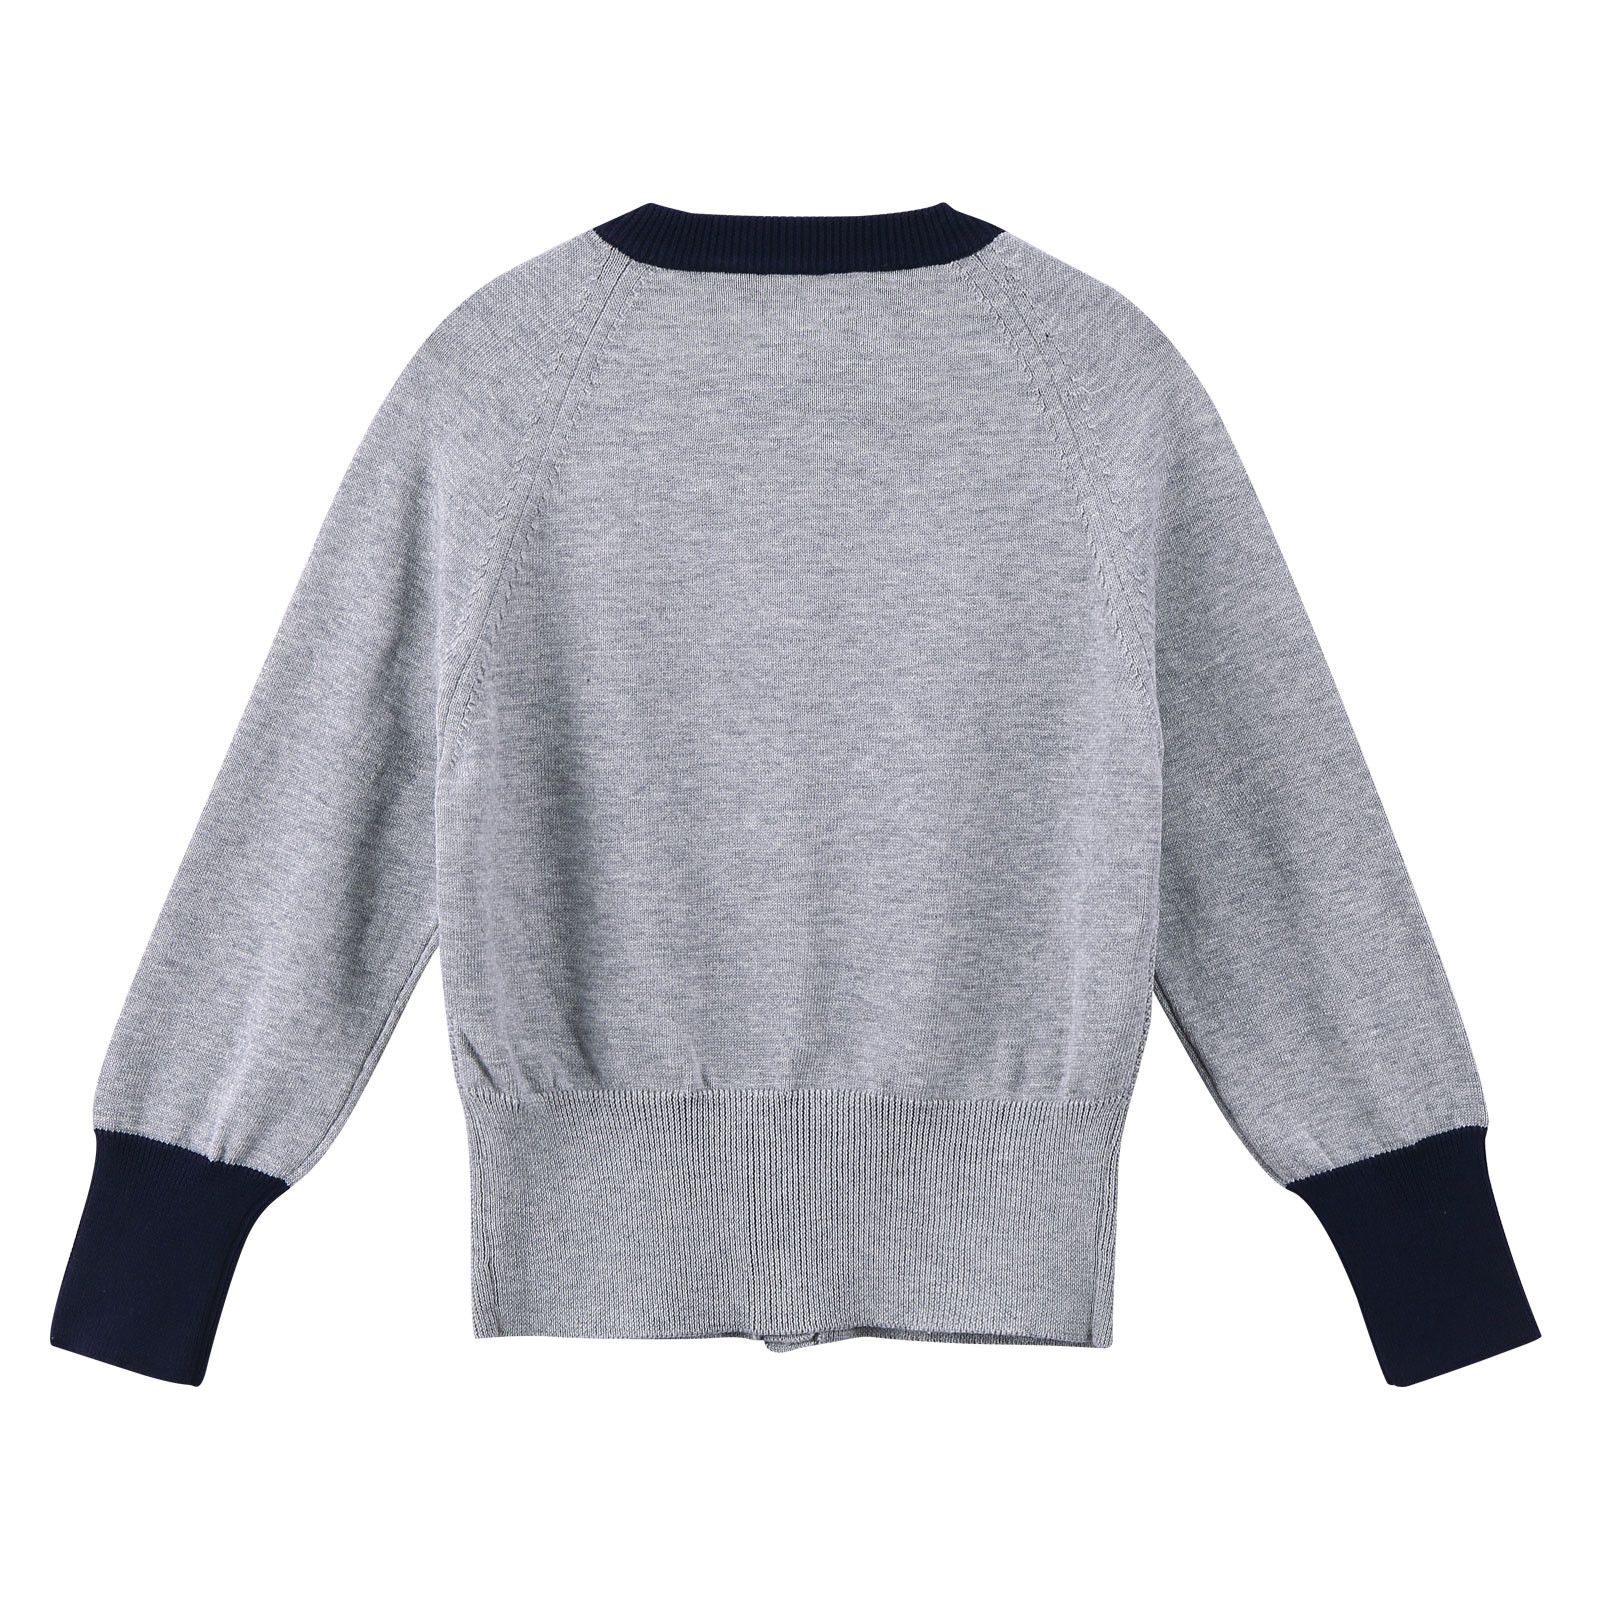 Girls Grey Knitted Cotton Cardigan With Ribbed Cuffs - CÉMAROSE | Children's Fashion Store - 2